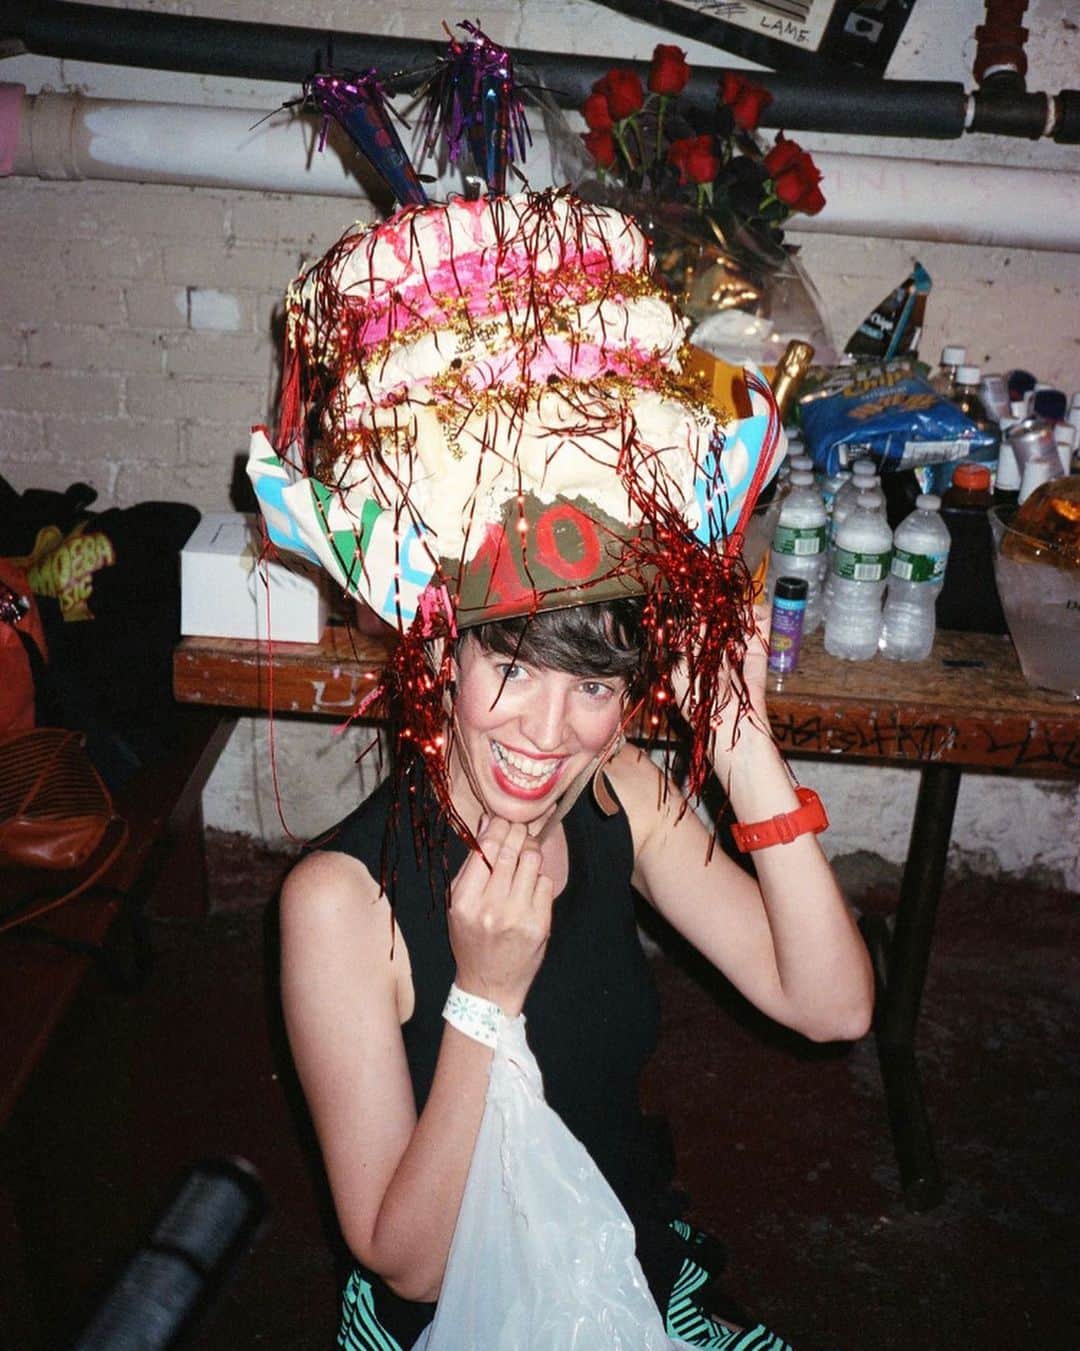 Karen Oのインスタグラム：「Aaaah HBD babe, this goofball Cher loves the shit out of her punk rock Bob Mackie ❤️‍🔥  I thank the gods of NYC for bringing us into the same orbit 🙌 to claw our way through this hysteric life together, we’re just getting warmed up baby! Love ya with all m’heart @christianjoycostumes ❤️❤️❤️」